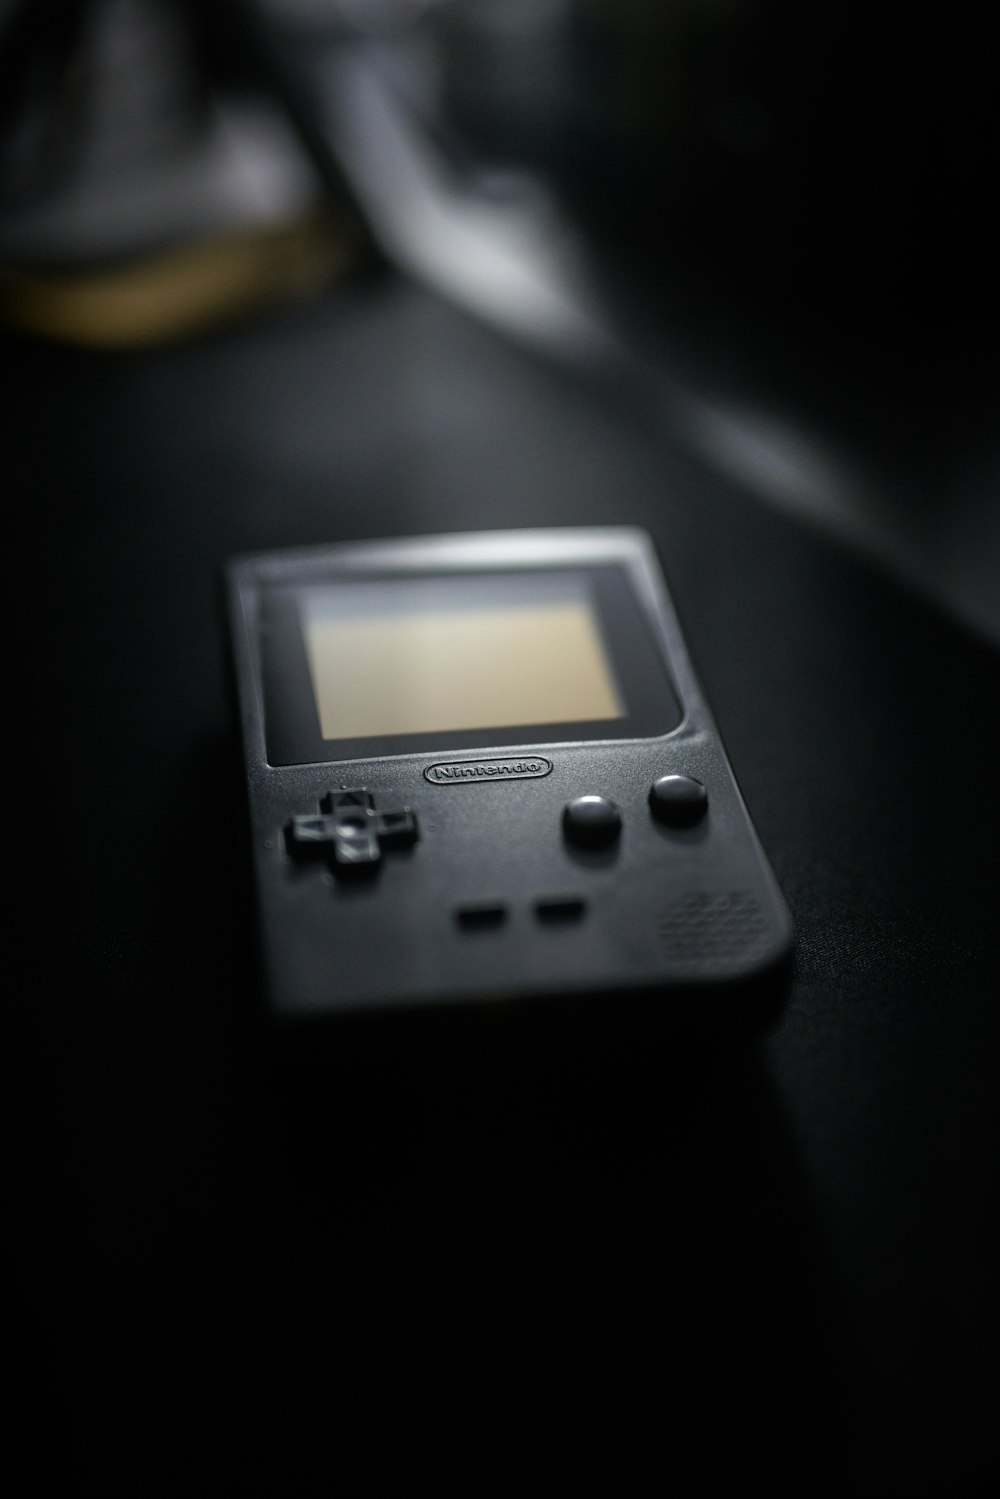 a close up of a gameboy on a table